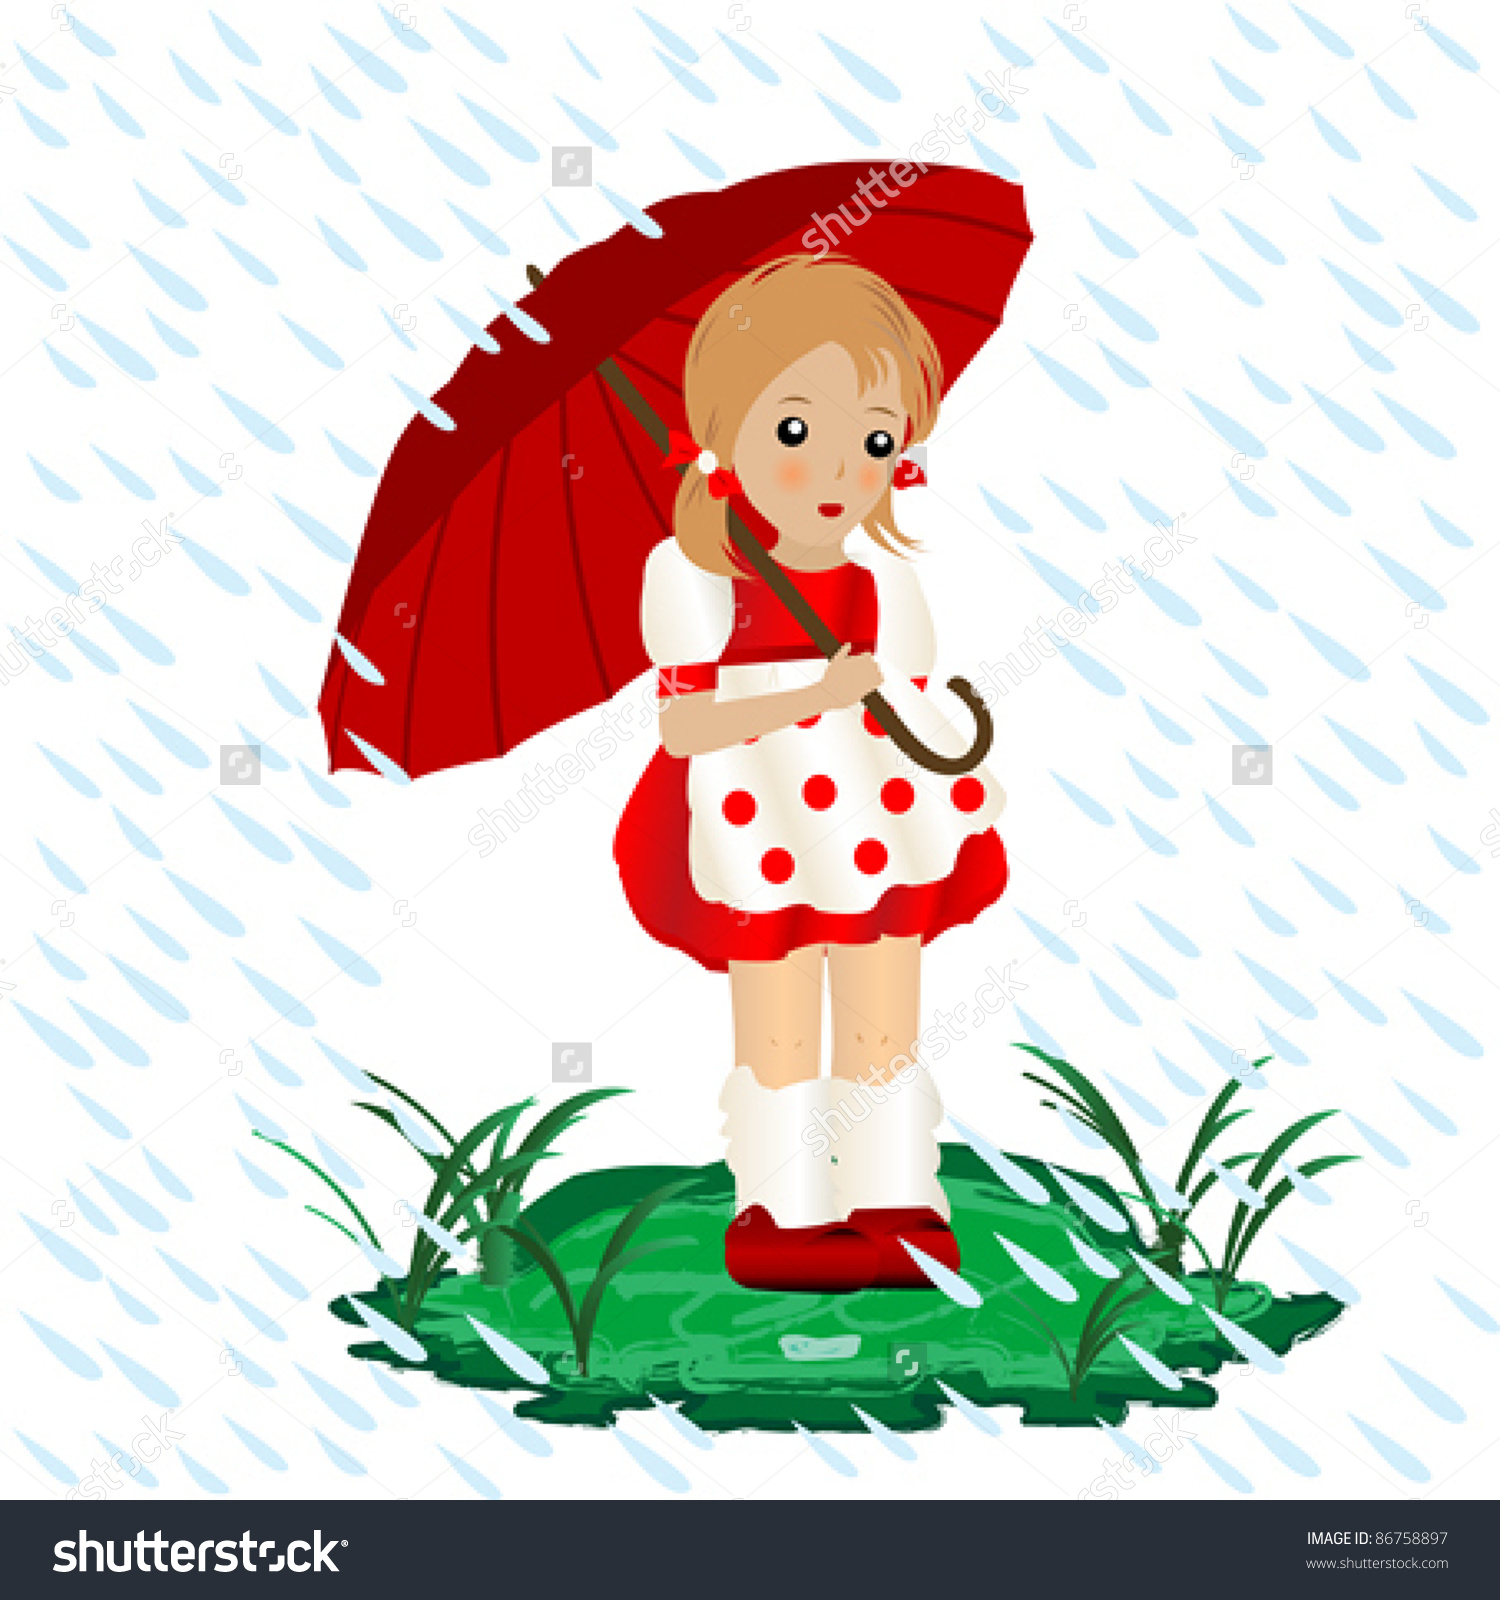 A Little Girl In The Rain With An Umbrella Illustration.